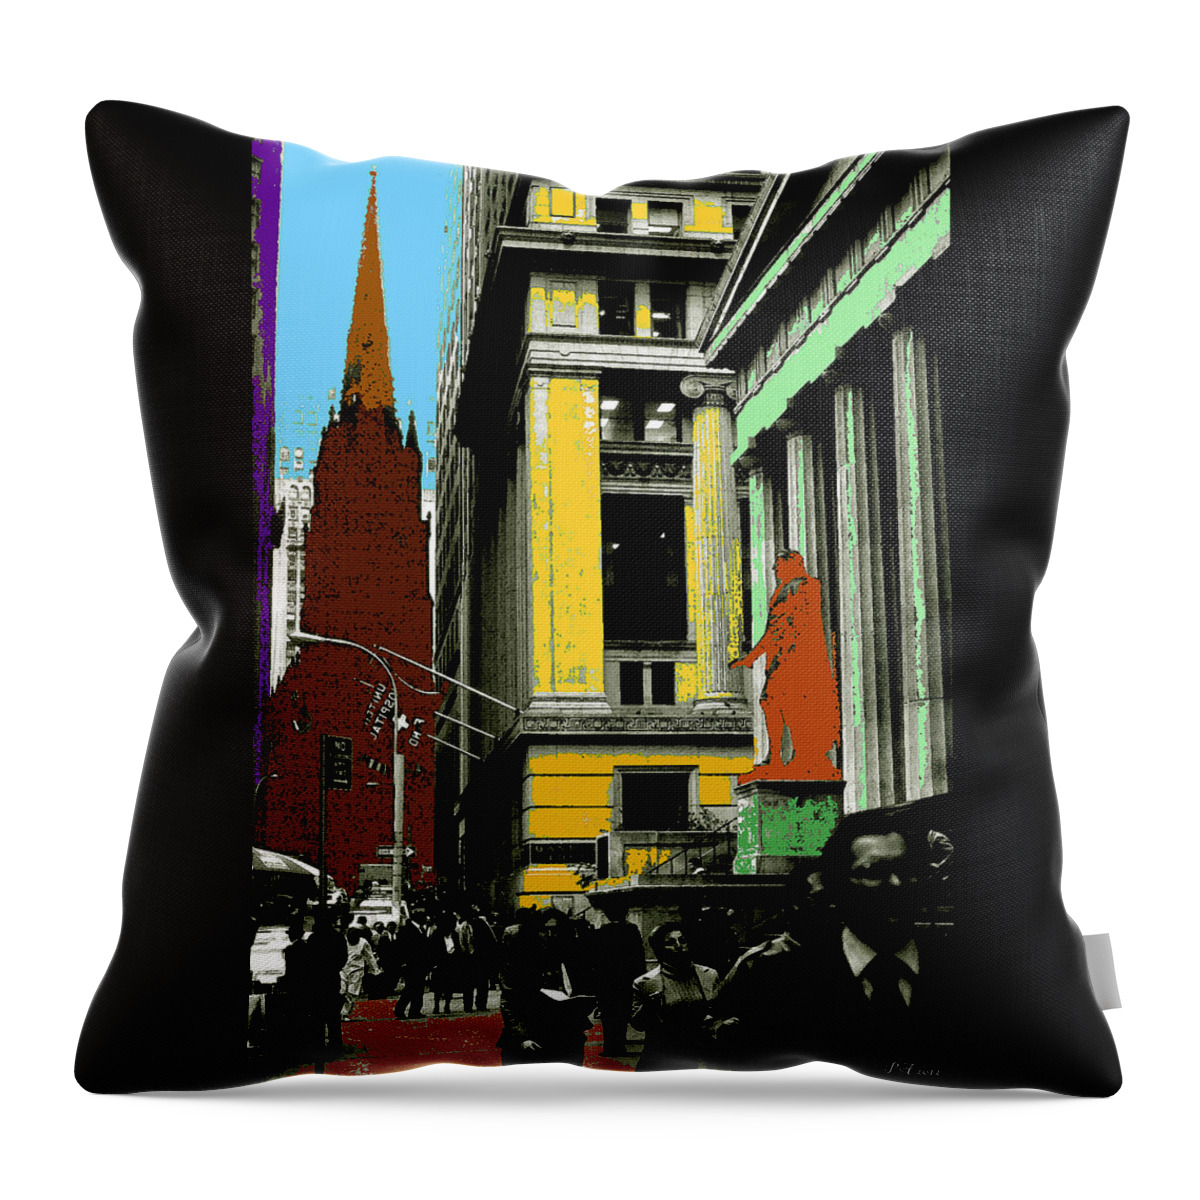 New+york Throw Pillow featuring the painting New York Pop Art 99 - Color Illustration by Peter Potter